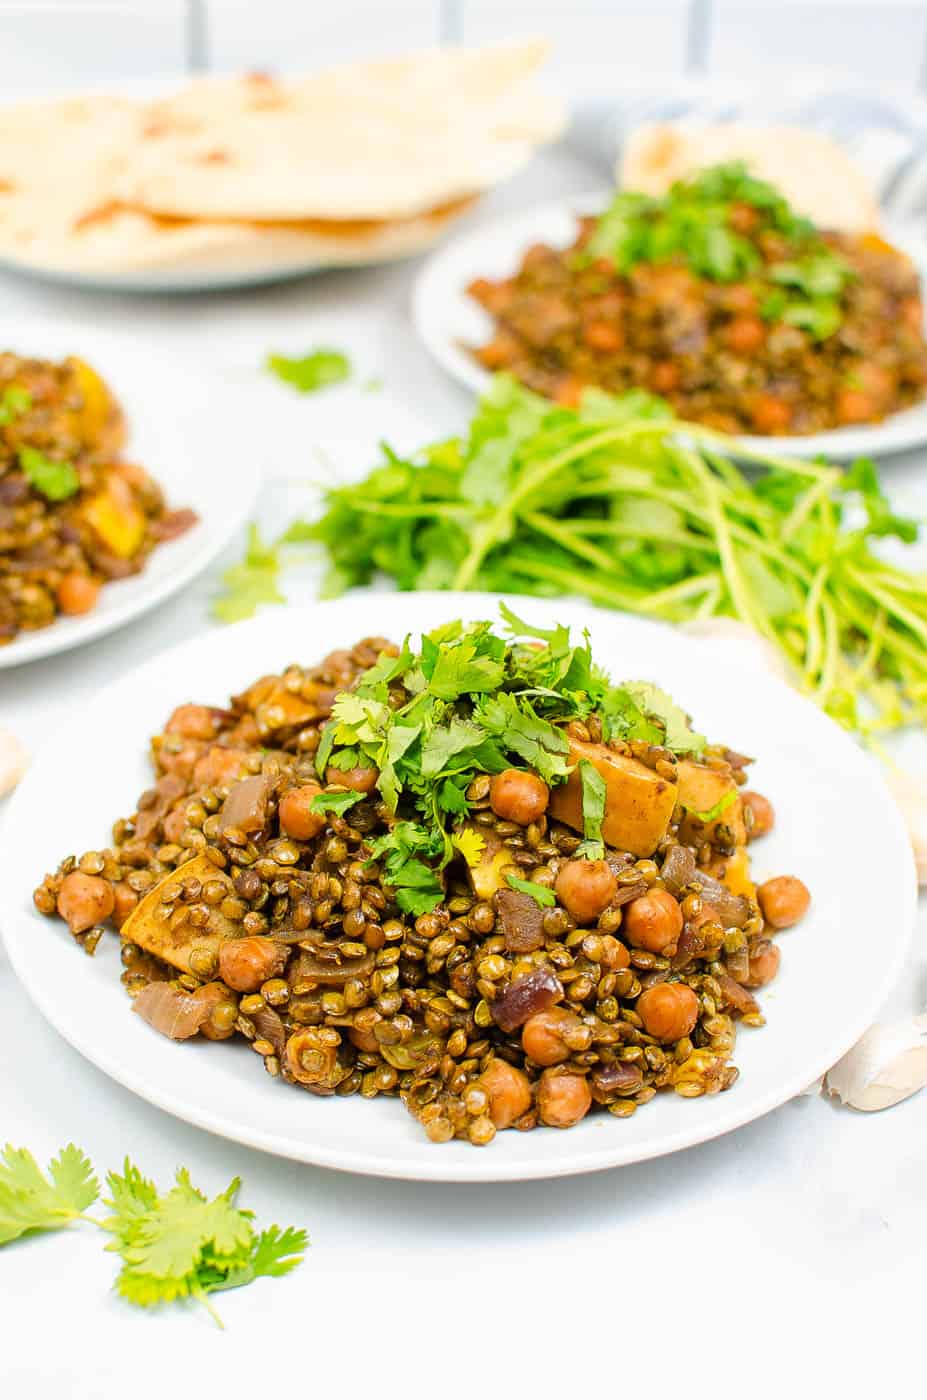 apple curry with lentils and chickpeas served on a white plate